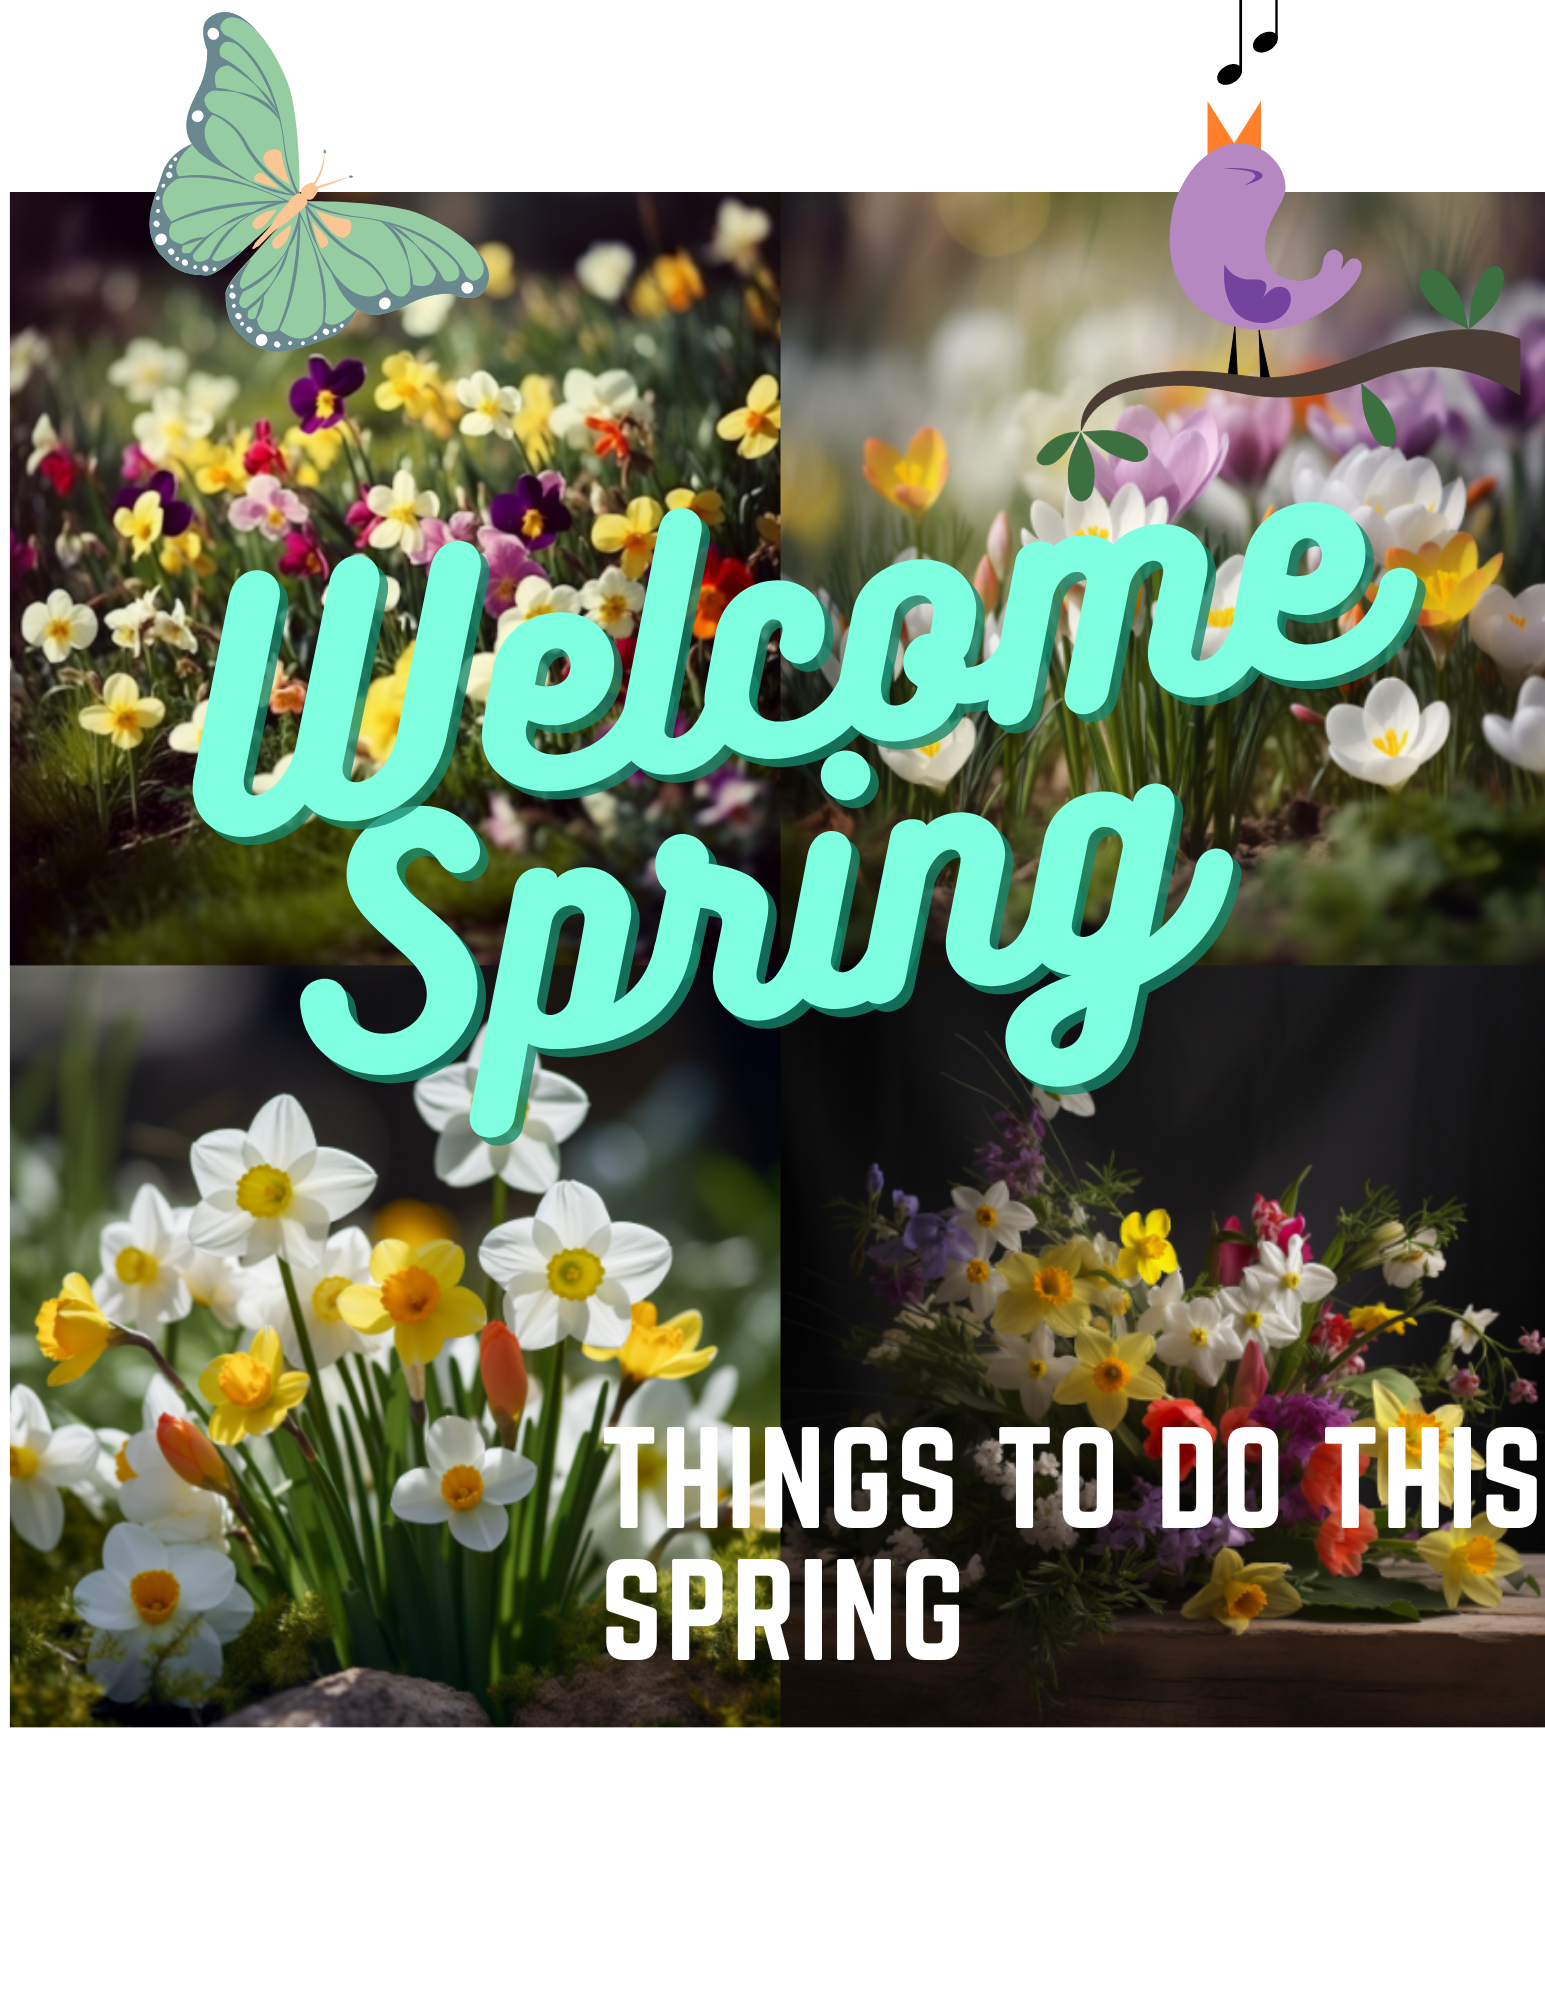 Things to Do This Spring: A Guide to Enjoying the Season to the Fullest